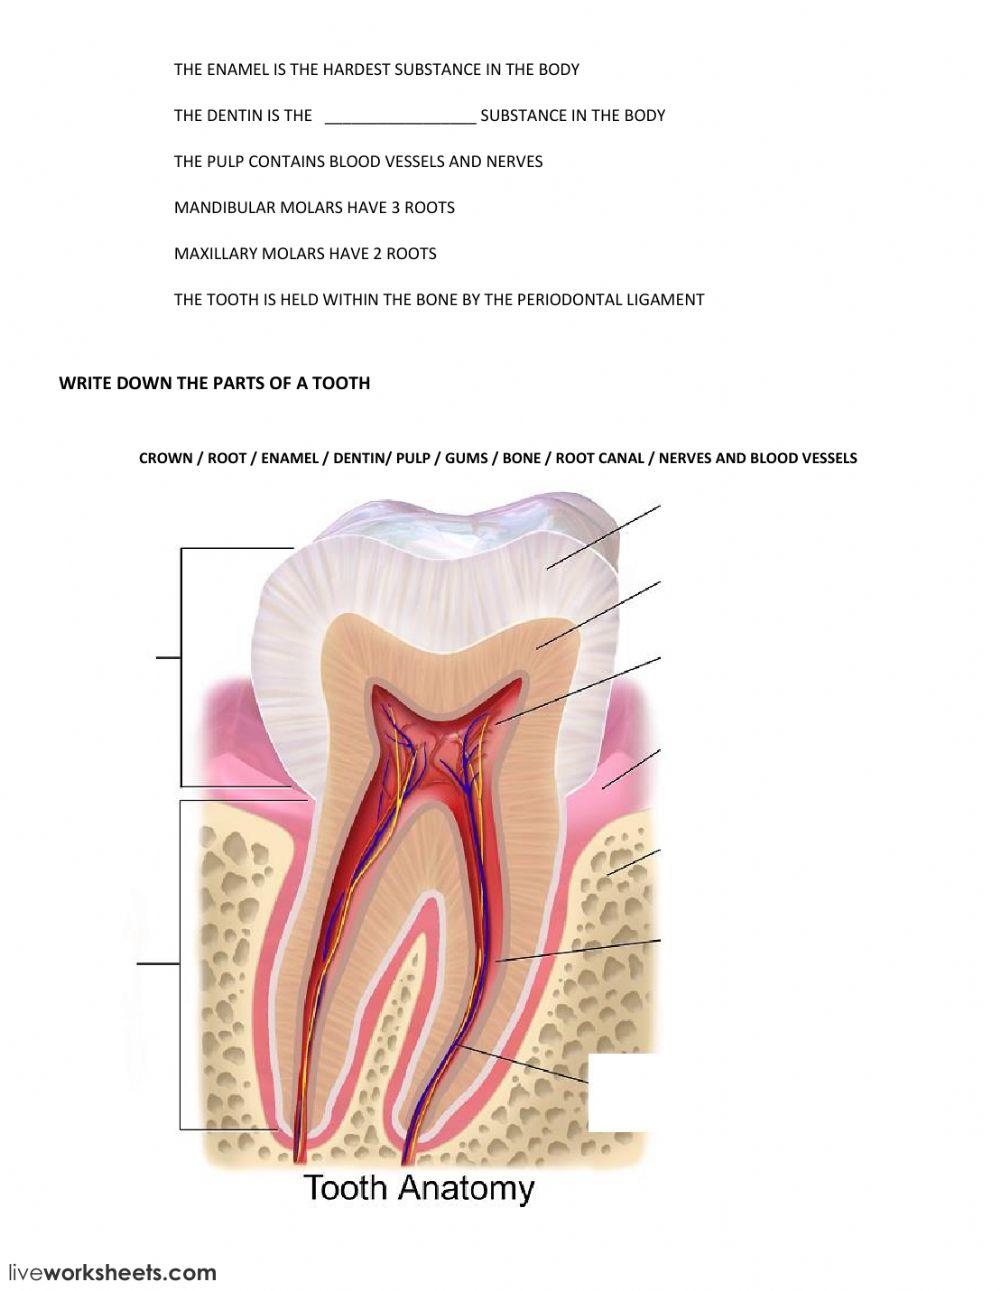 TOOTH ANATOMY FIXED